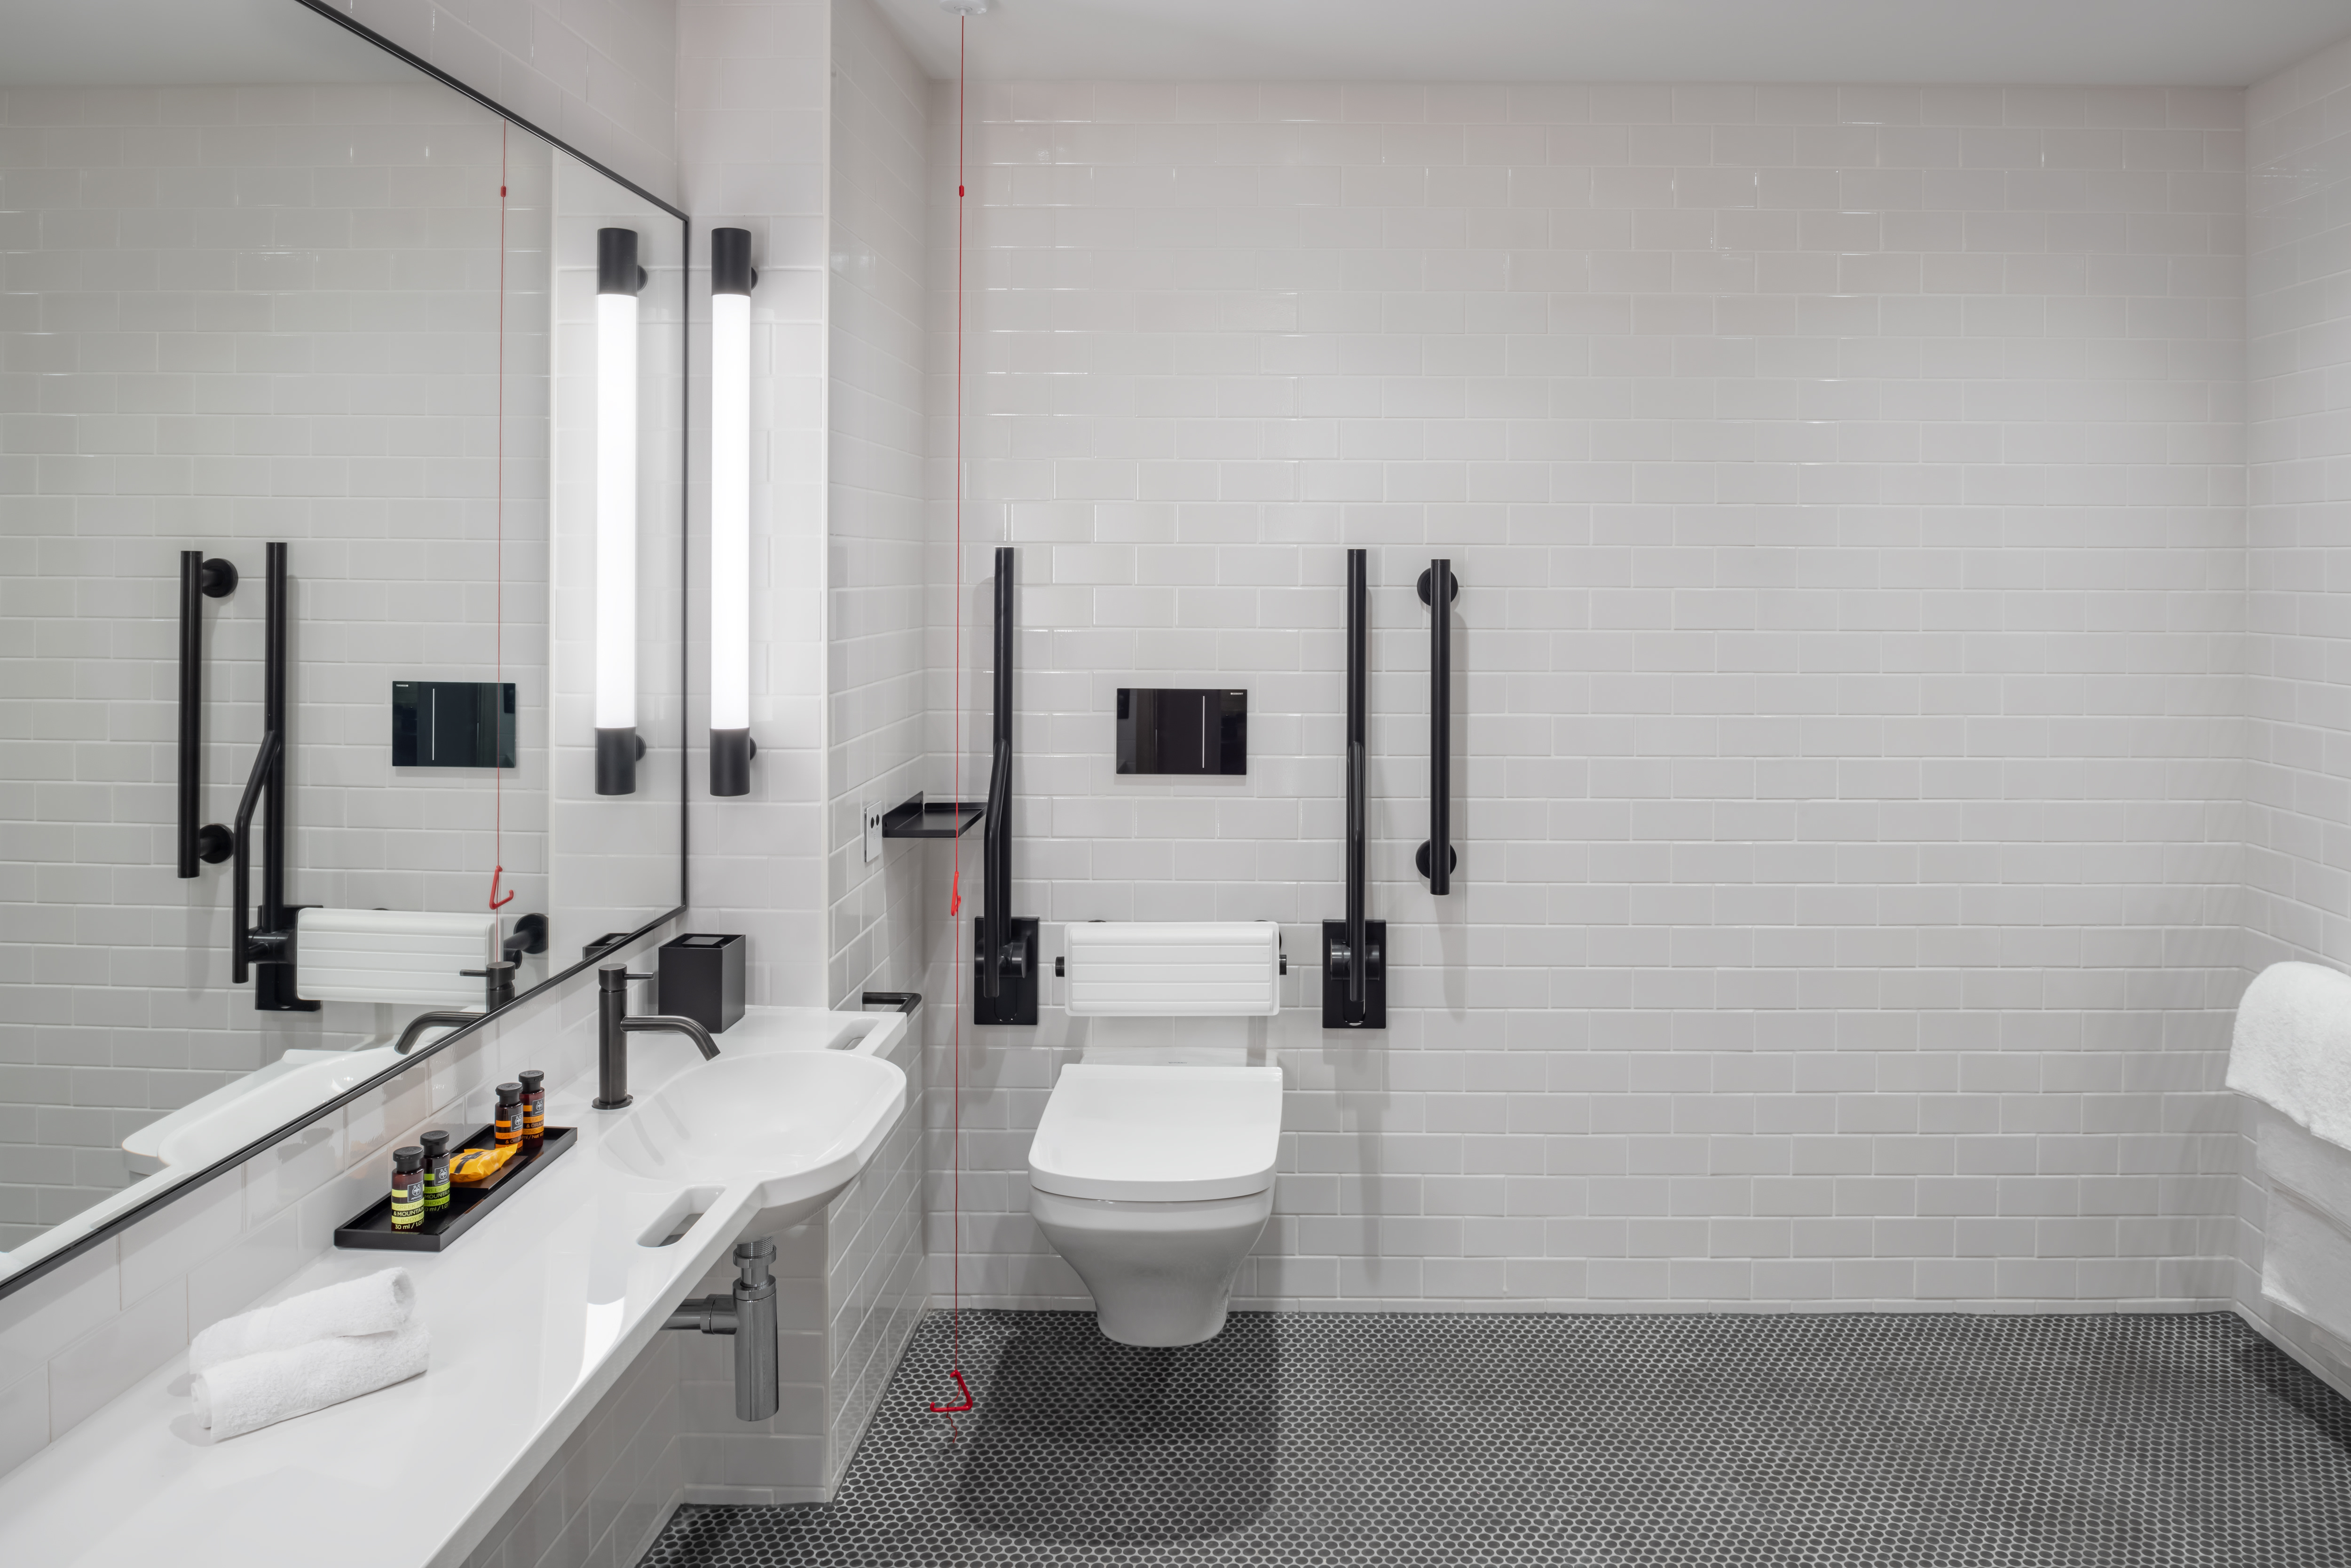 Accessible bathroom with grab bars